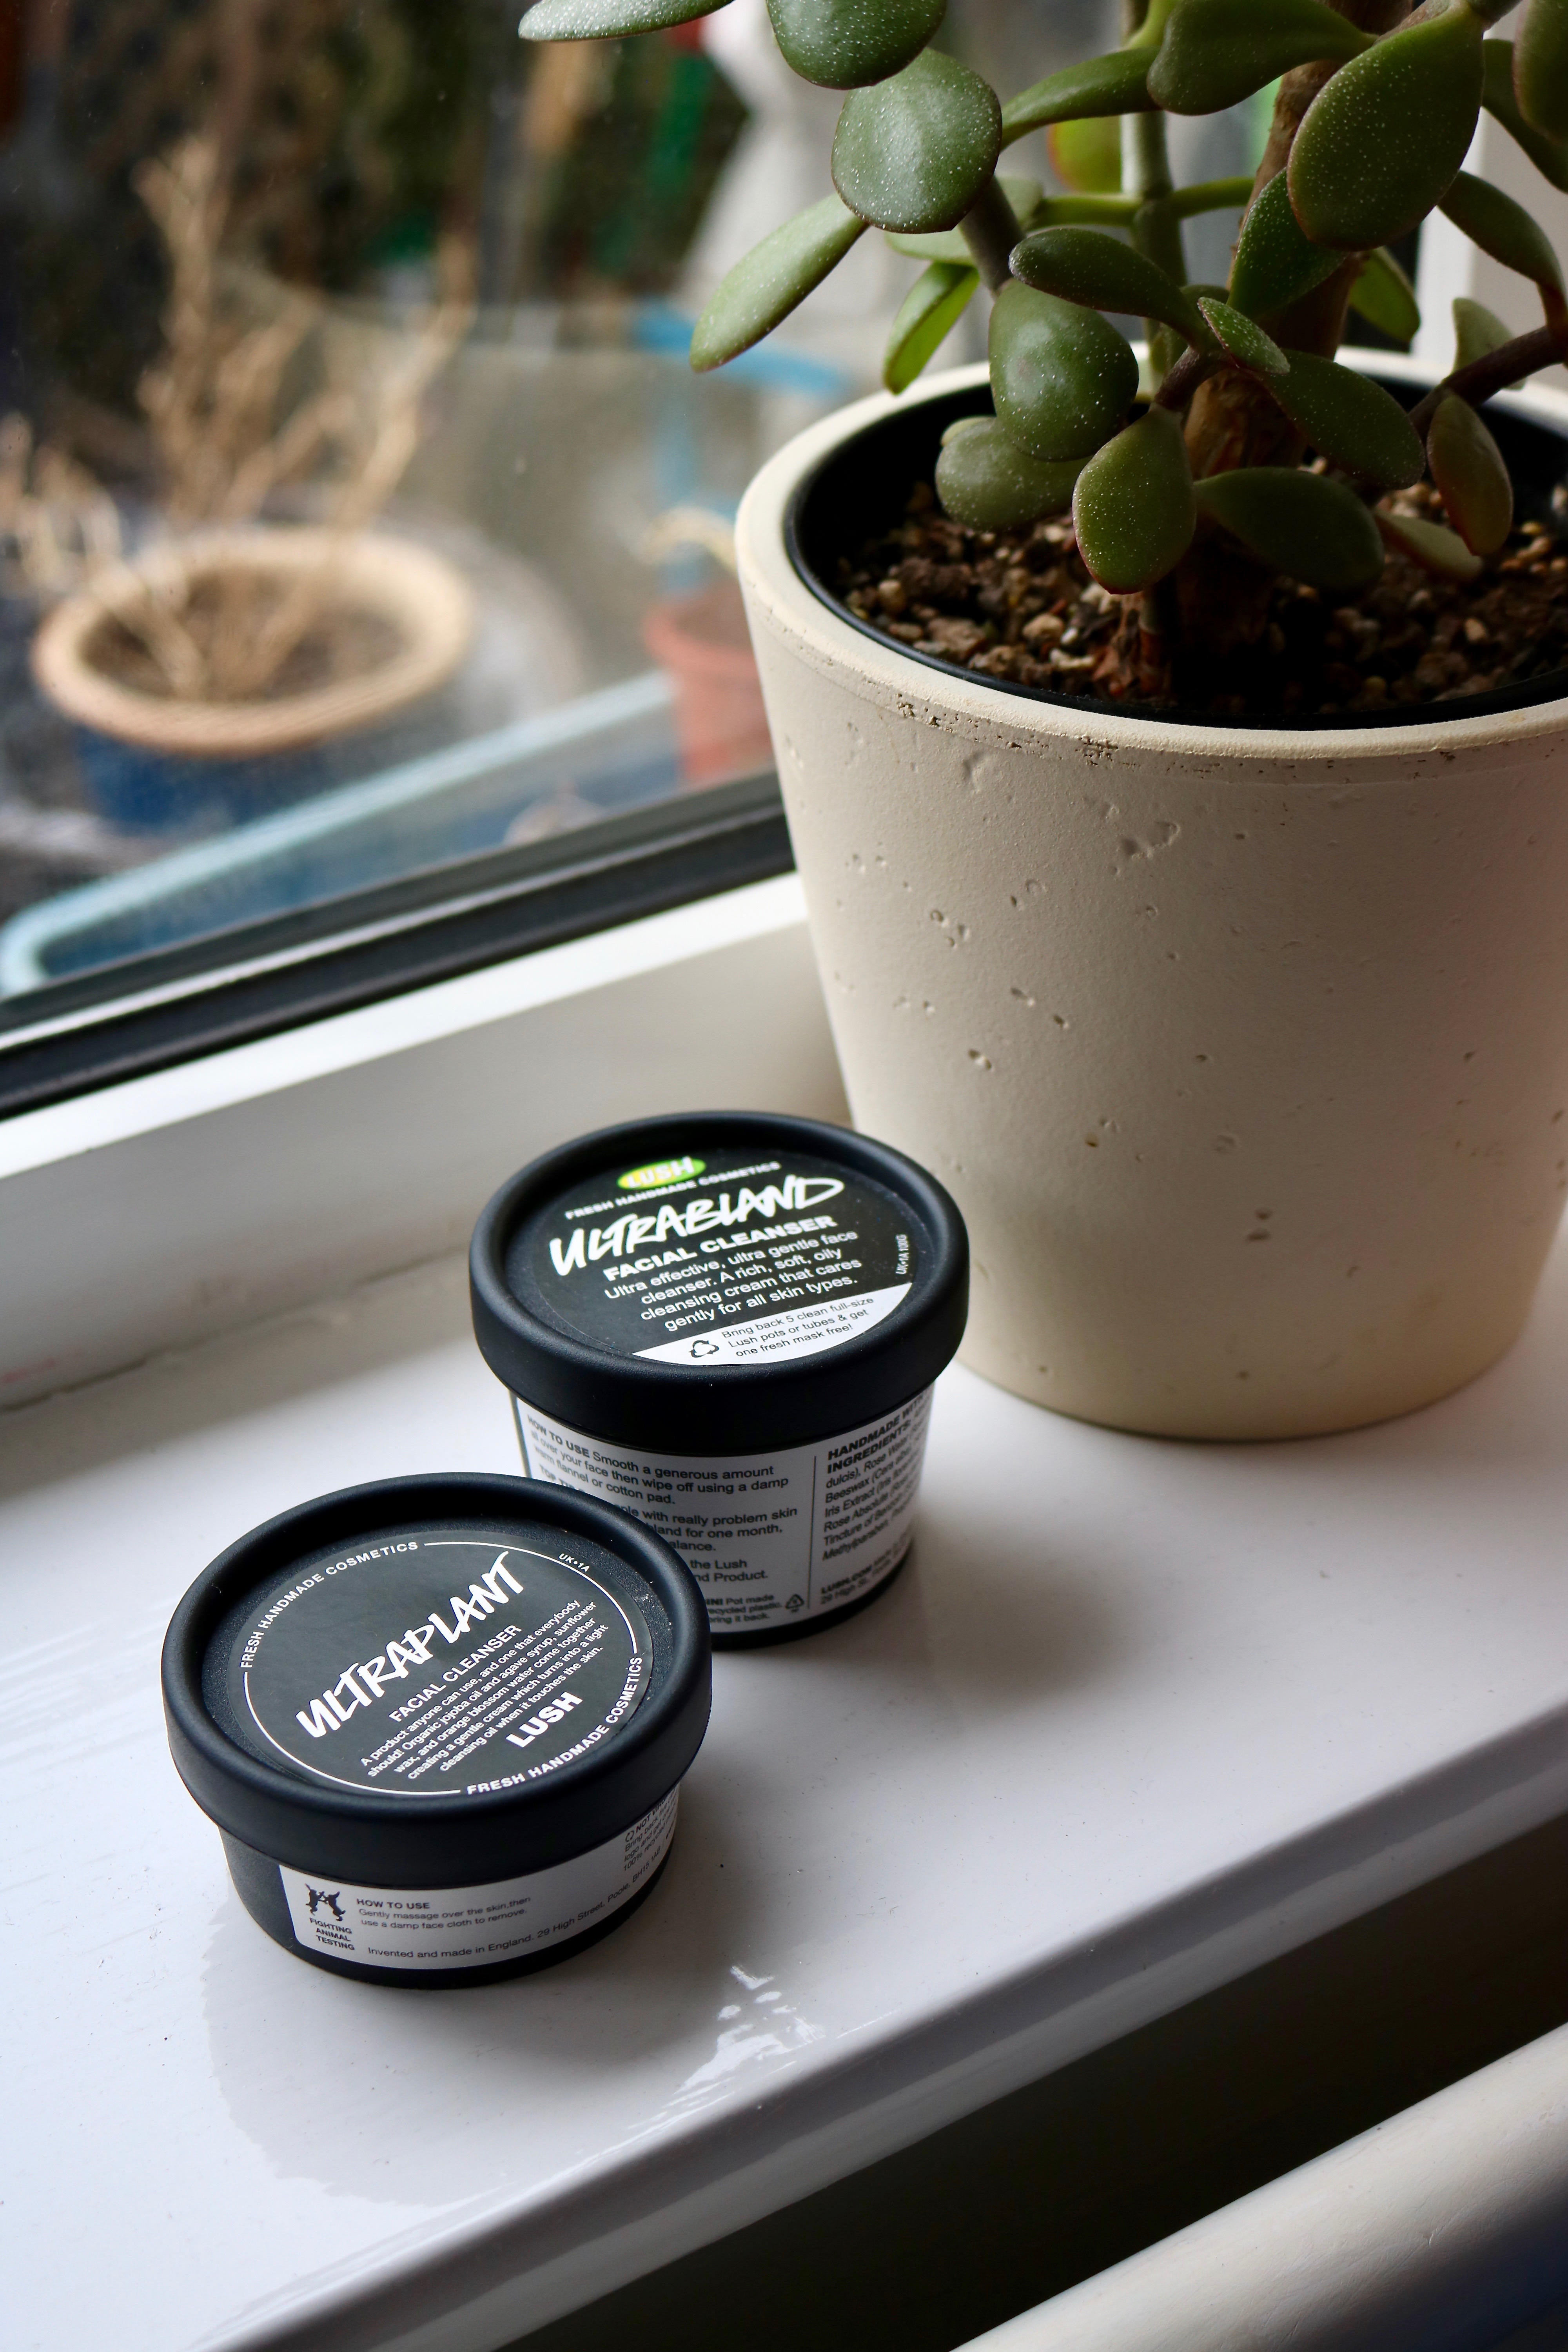 Lush Ultrabland & Ultraplant cleansers